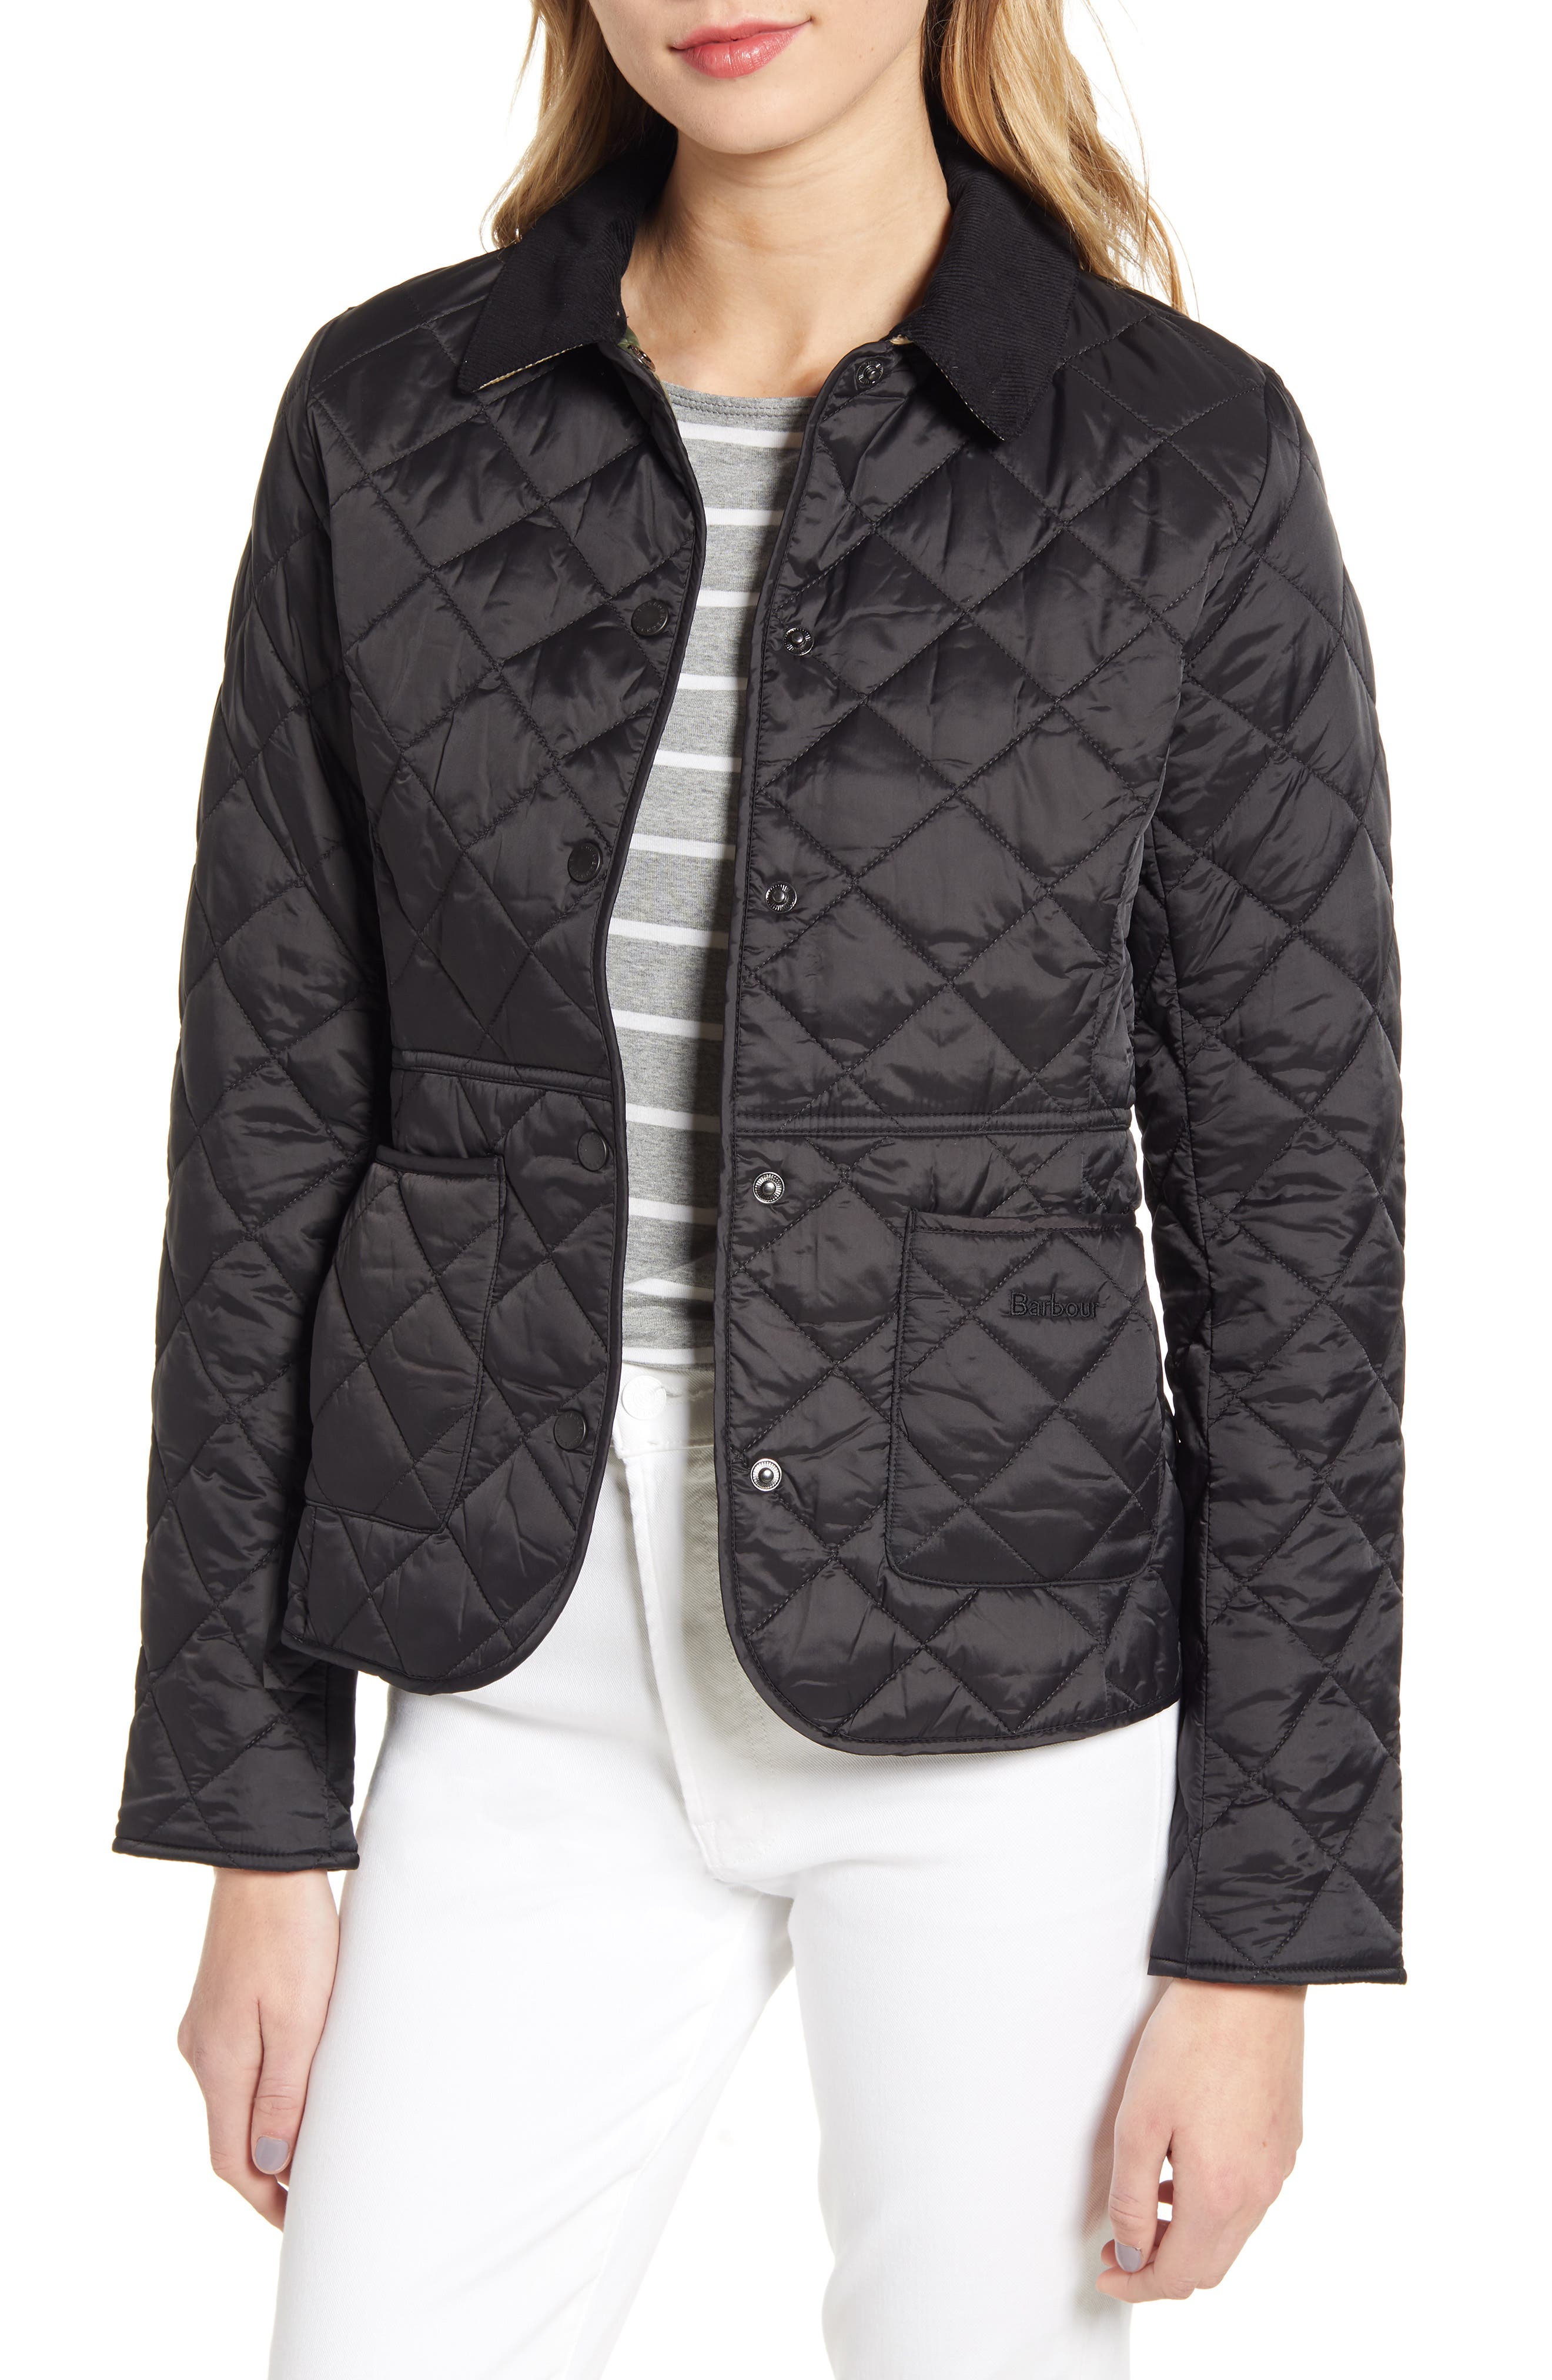 barbour puffer jacket womens